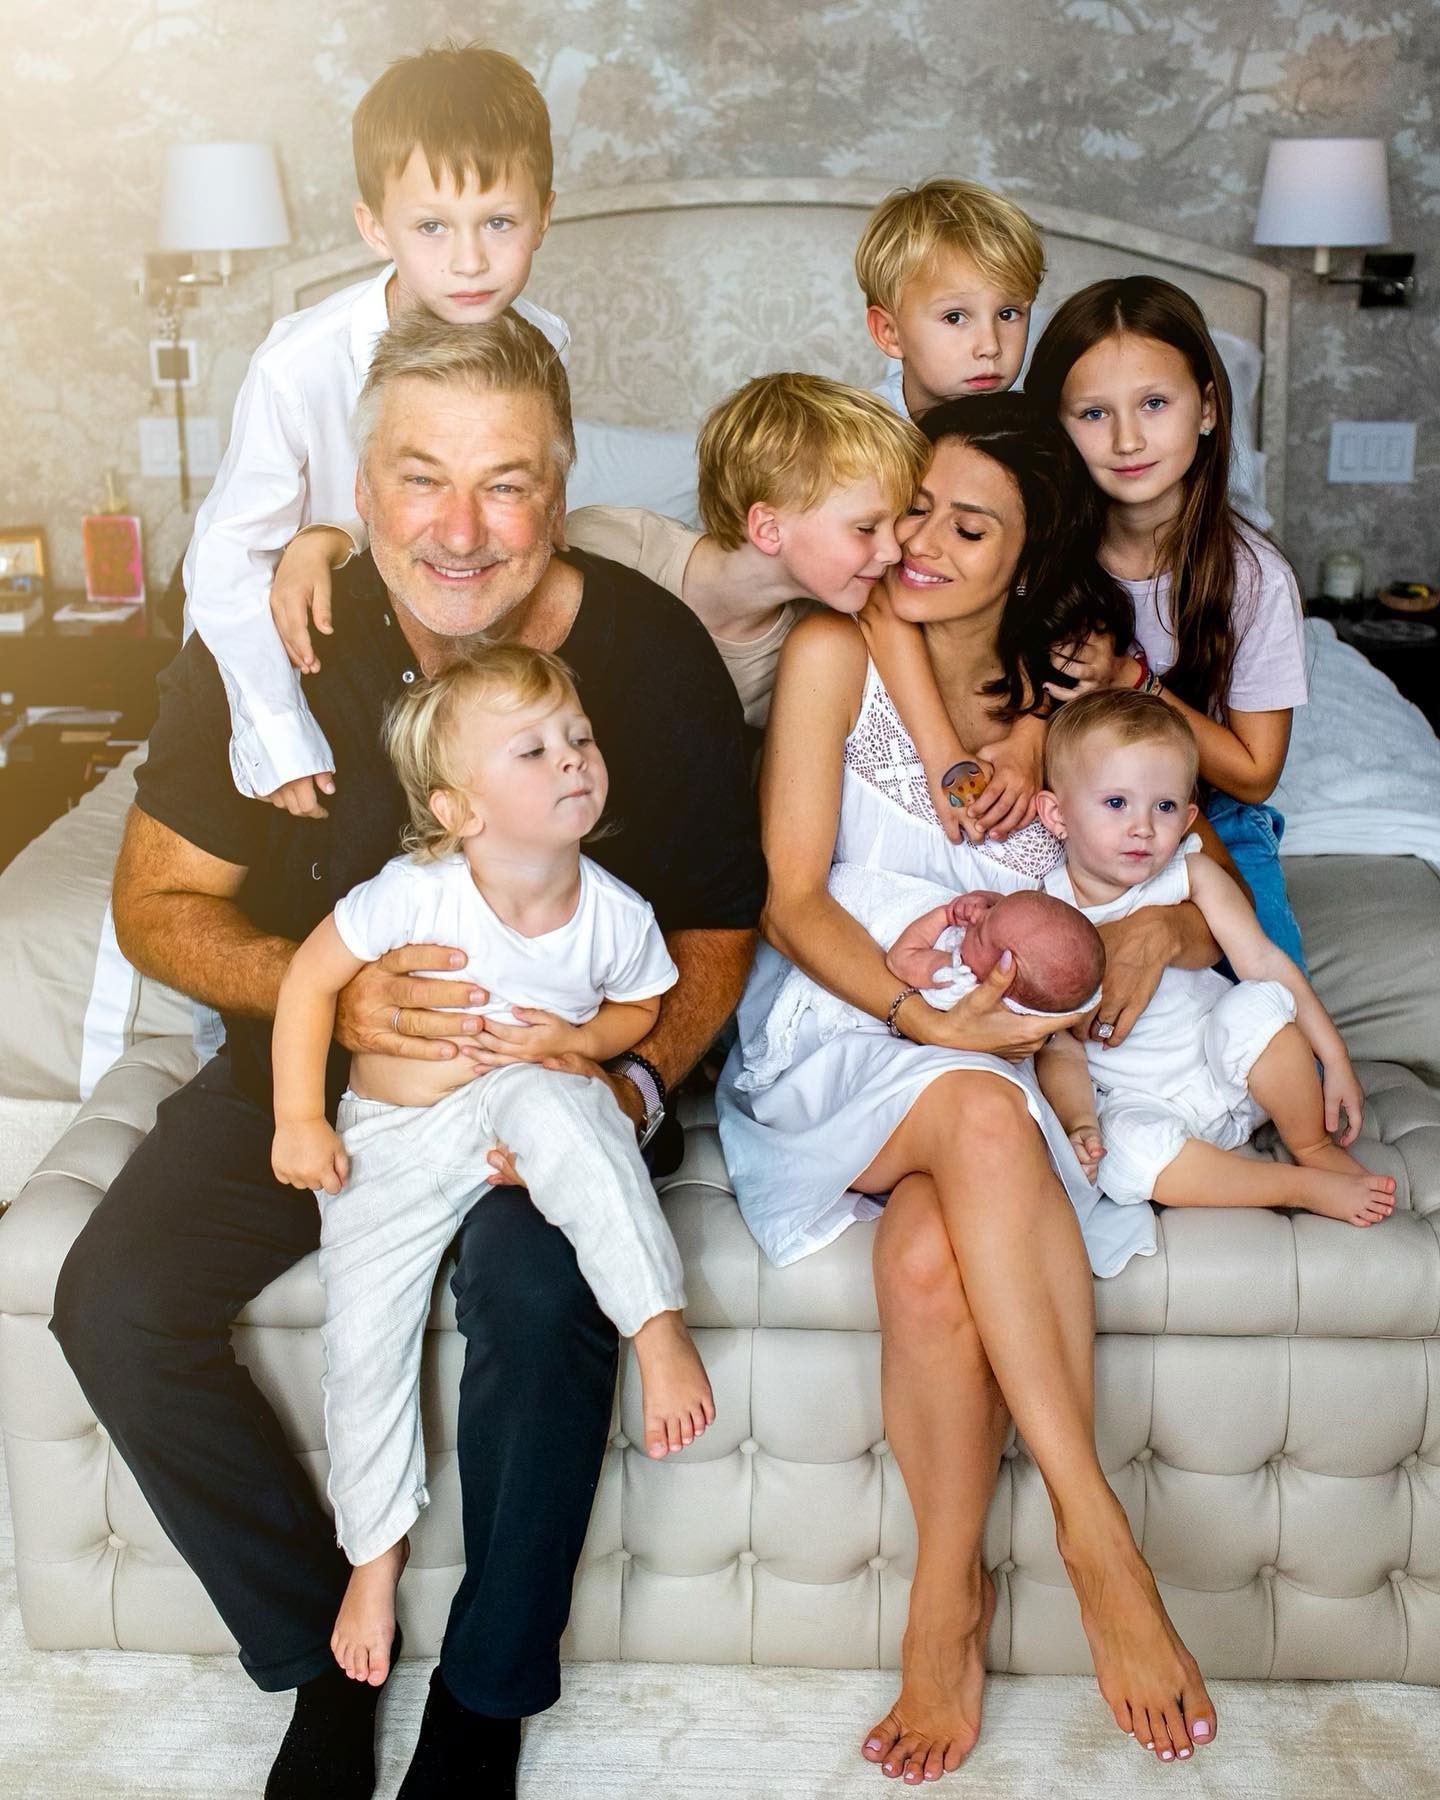 Alec-and-Hilaria-Baldwin-Share-1st-Family-Pic-Instagram.jpg